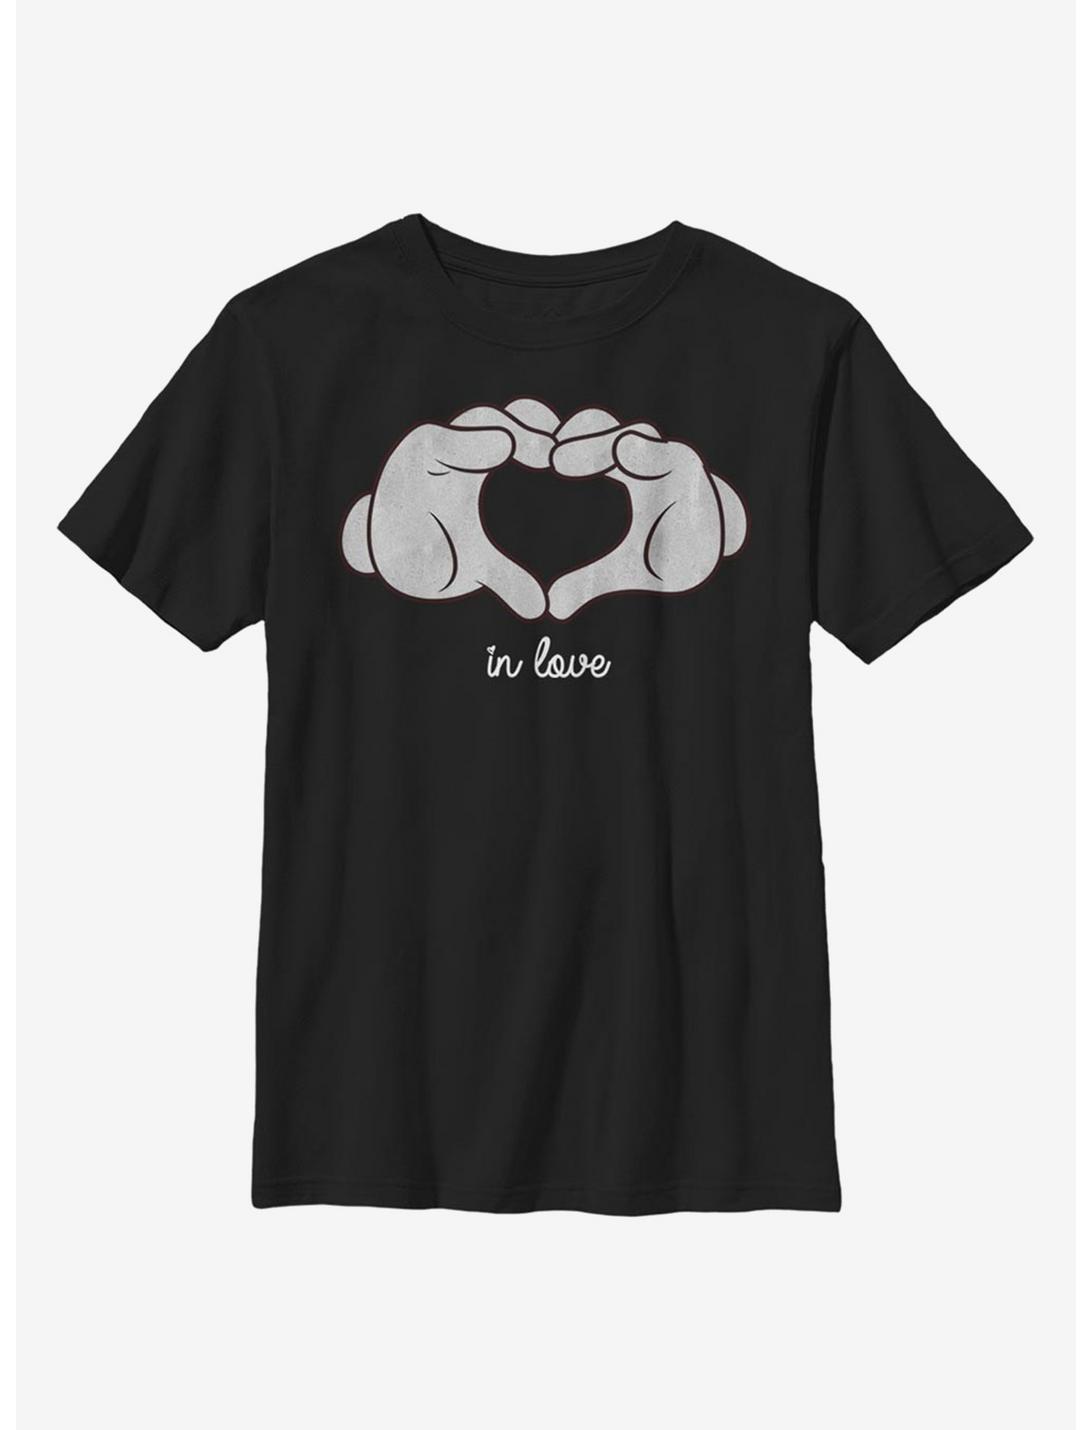 Disney Mickey Mouse Glove Heart Youth T-Shirt, BLACK, hi-res